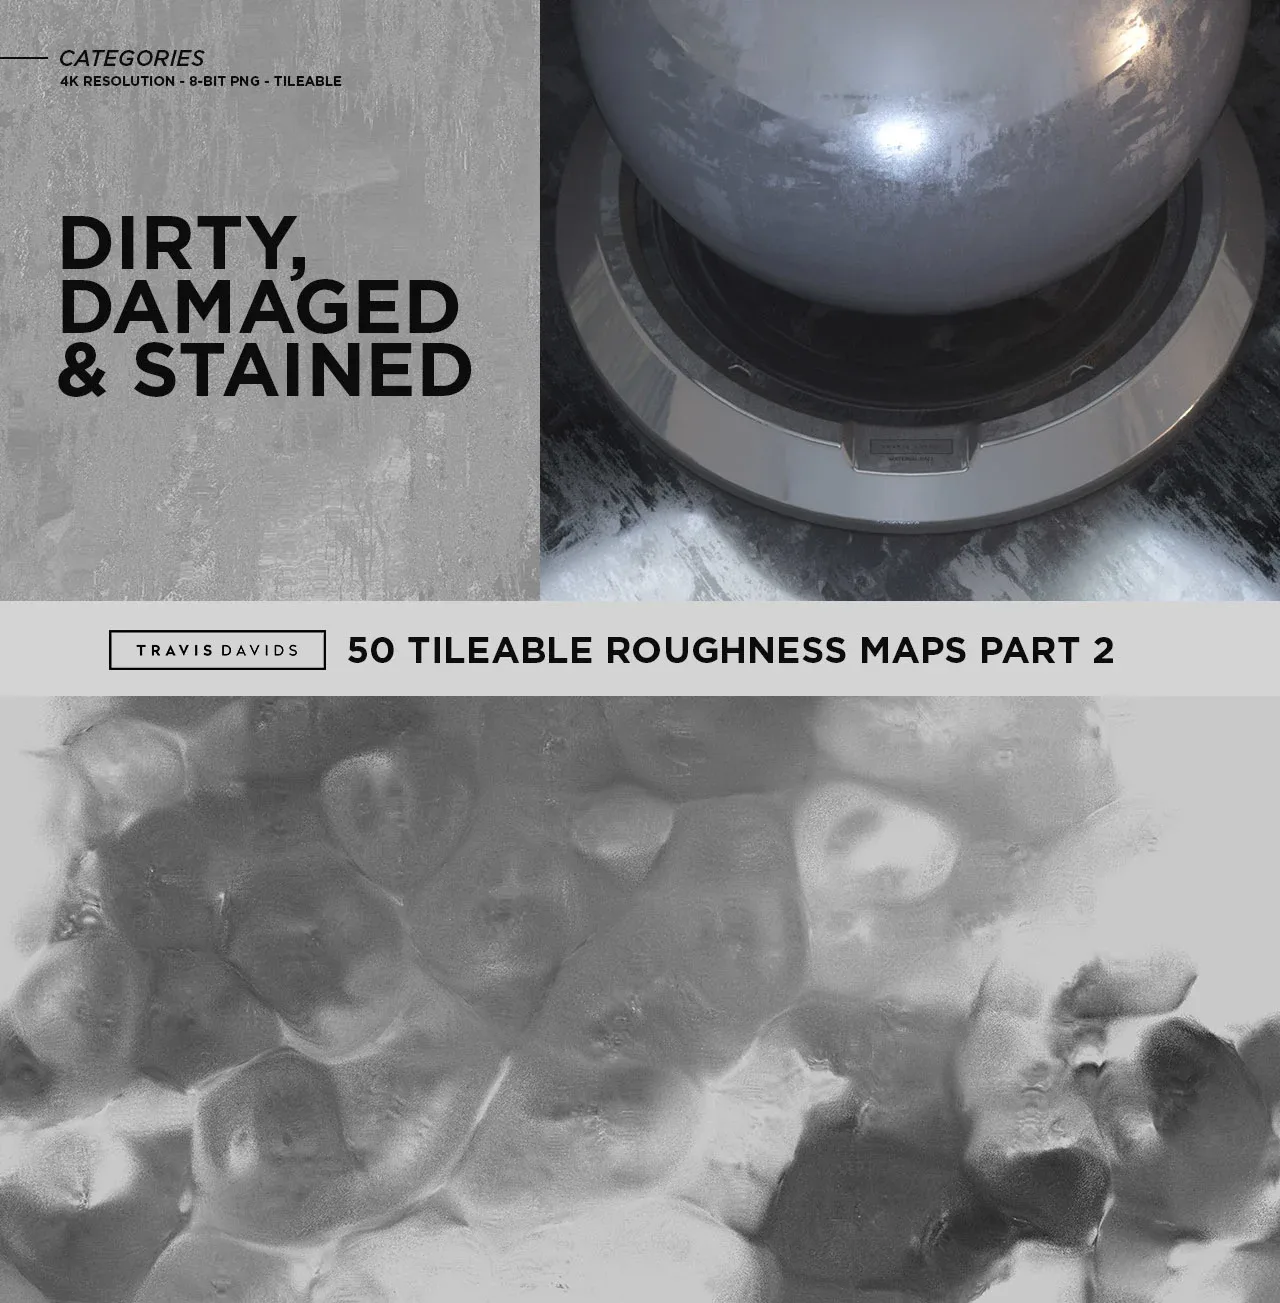 50 Tileable Roughness Maps - Surface Imperfection - Part 2